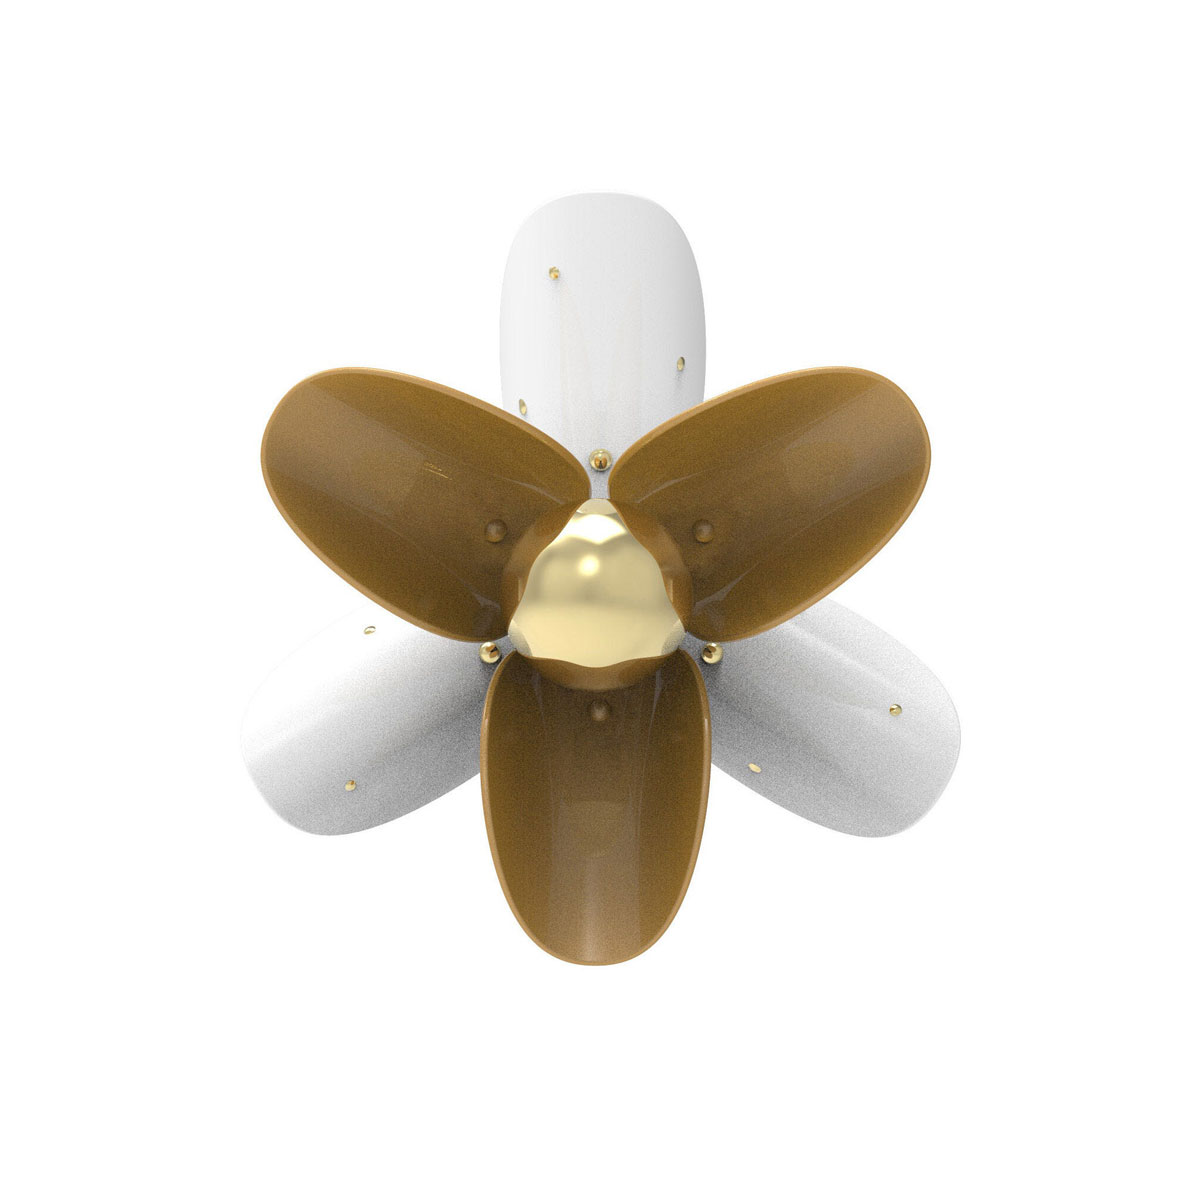 Lladro Modern Lighting, Blossom Wall Sconce. White And Gold.